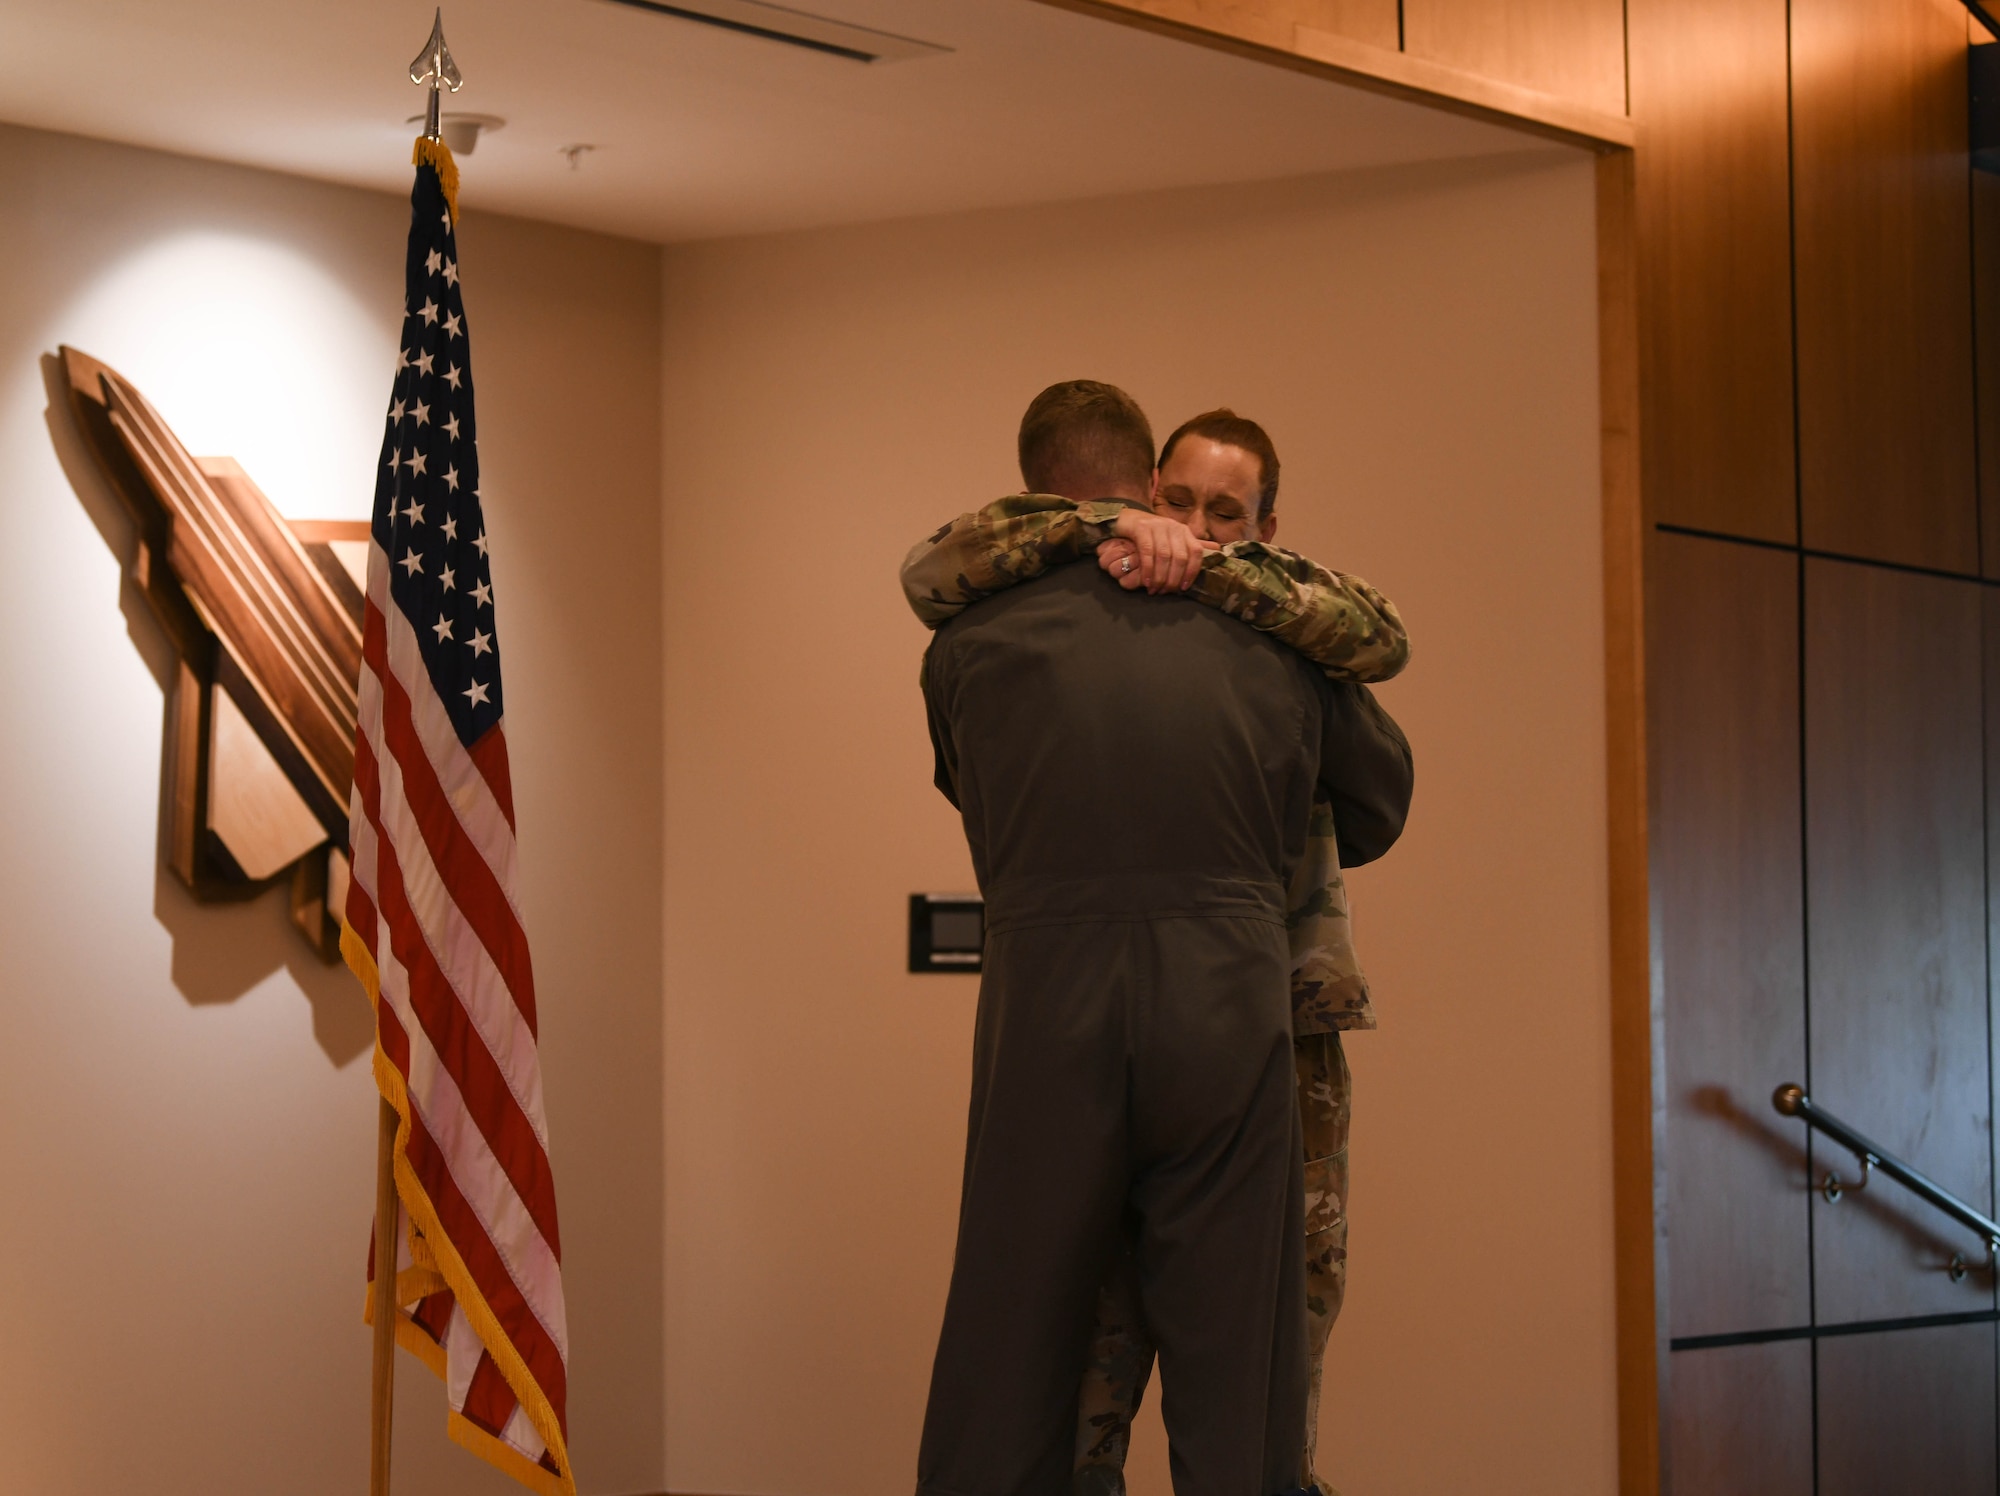 Grabham embraces Garcia after conducting the oath of enlistment